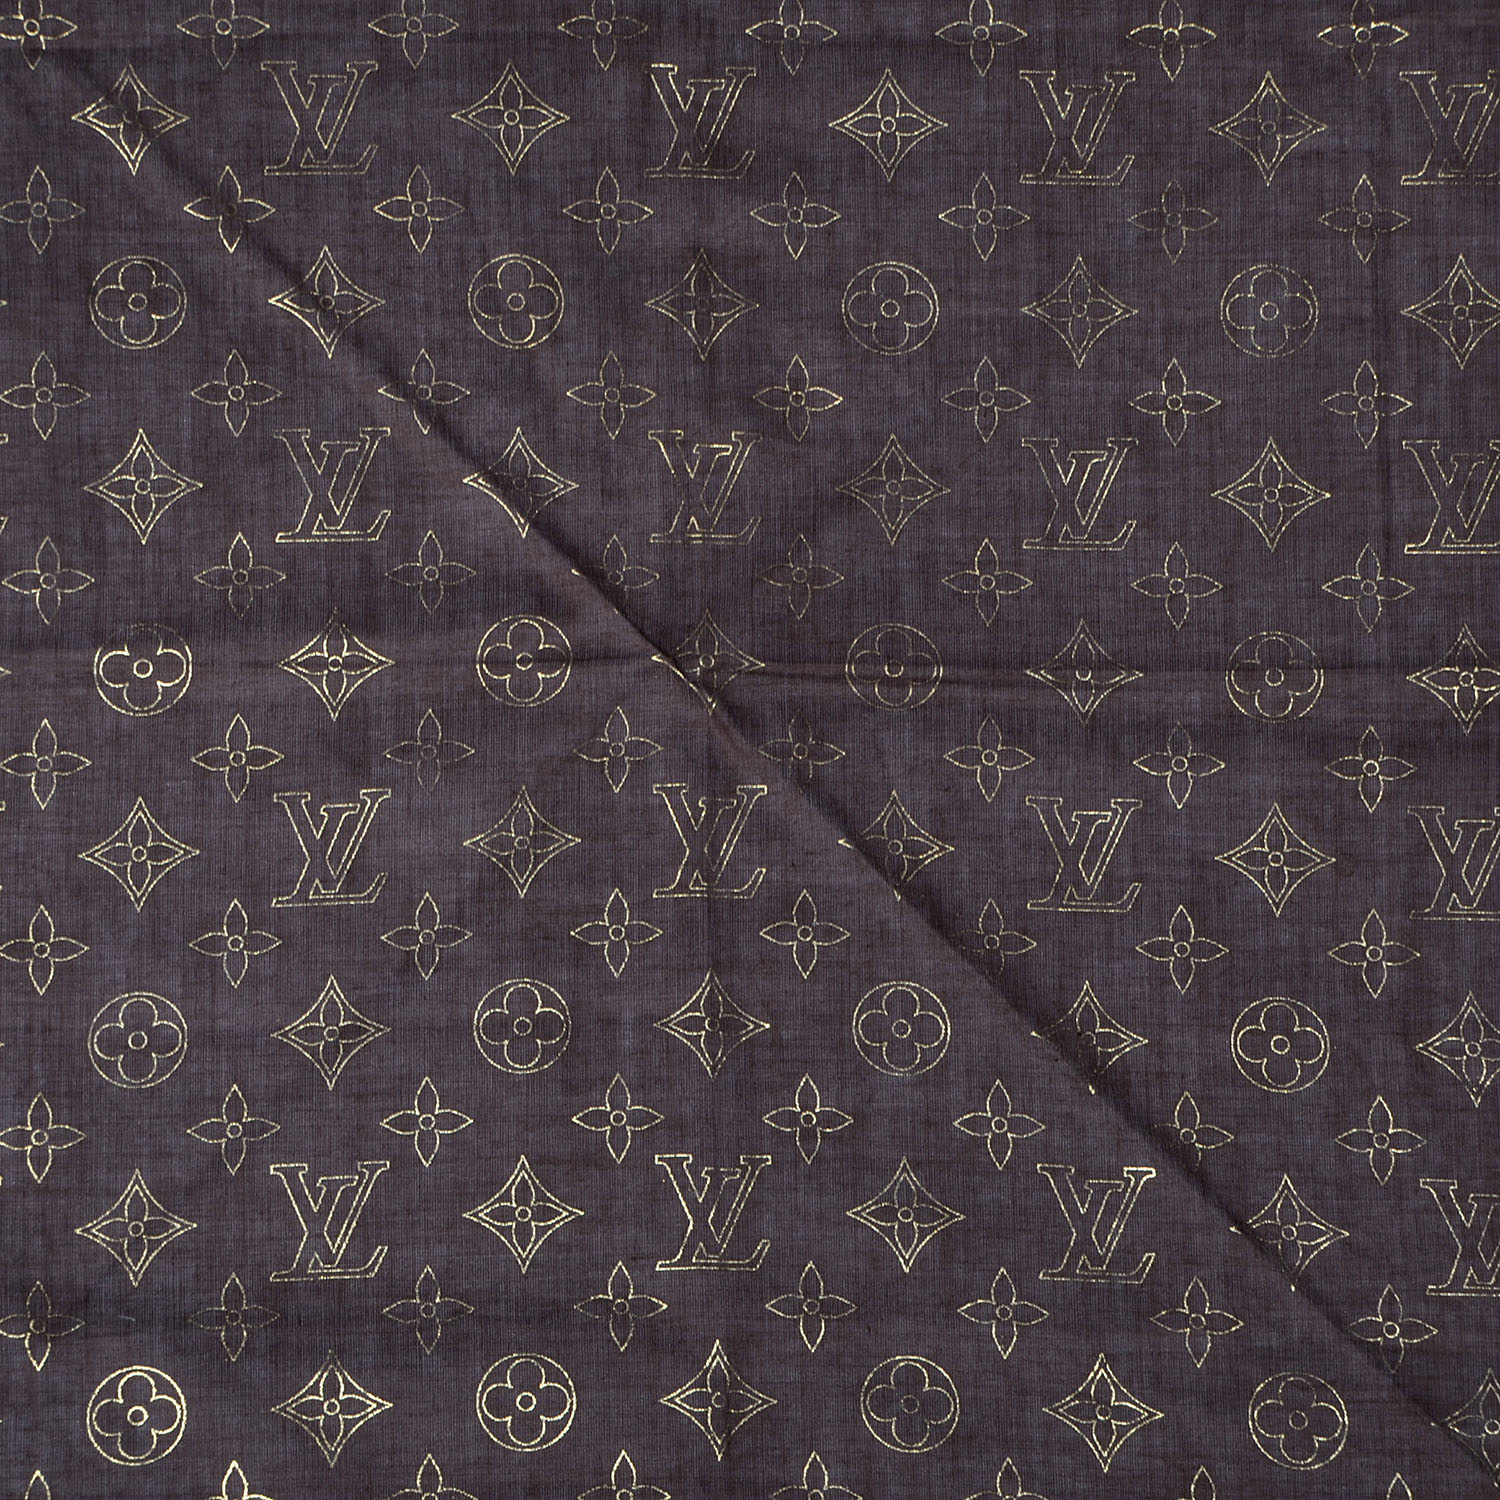 LOUIS VUITTON Cotton Monogram Scarf Brown and Gold 83001